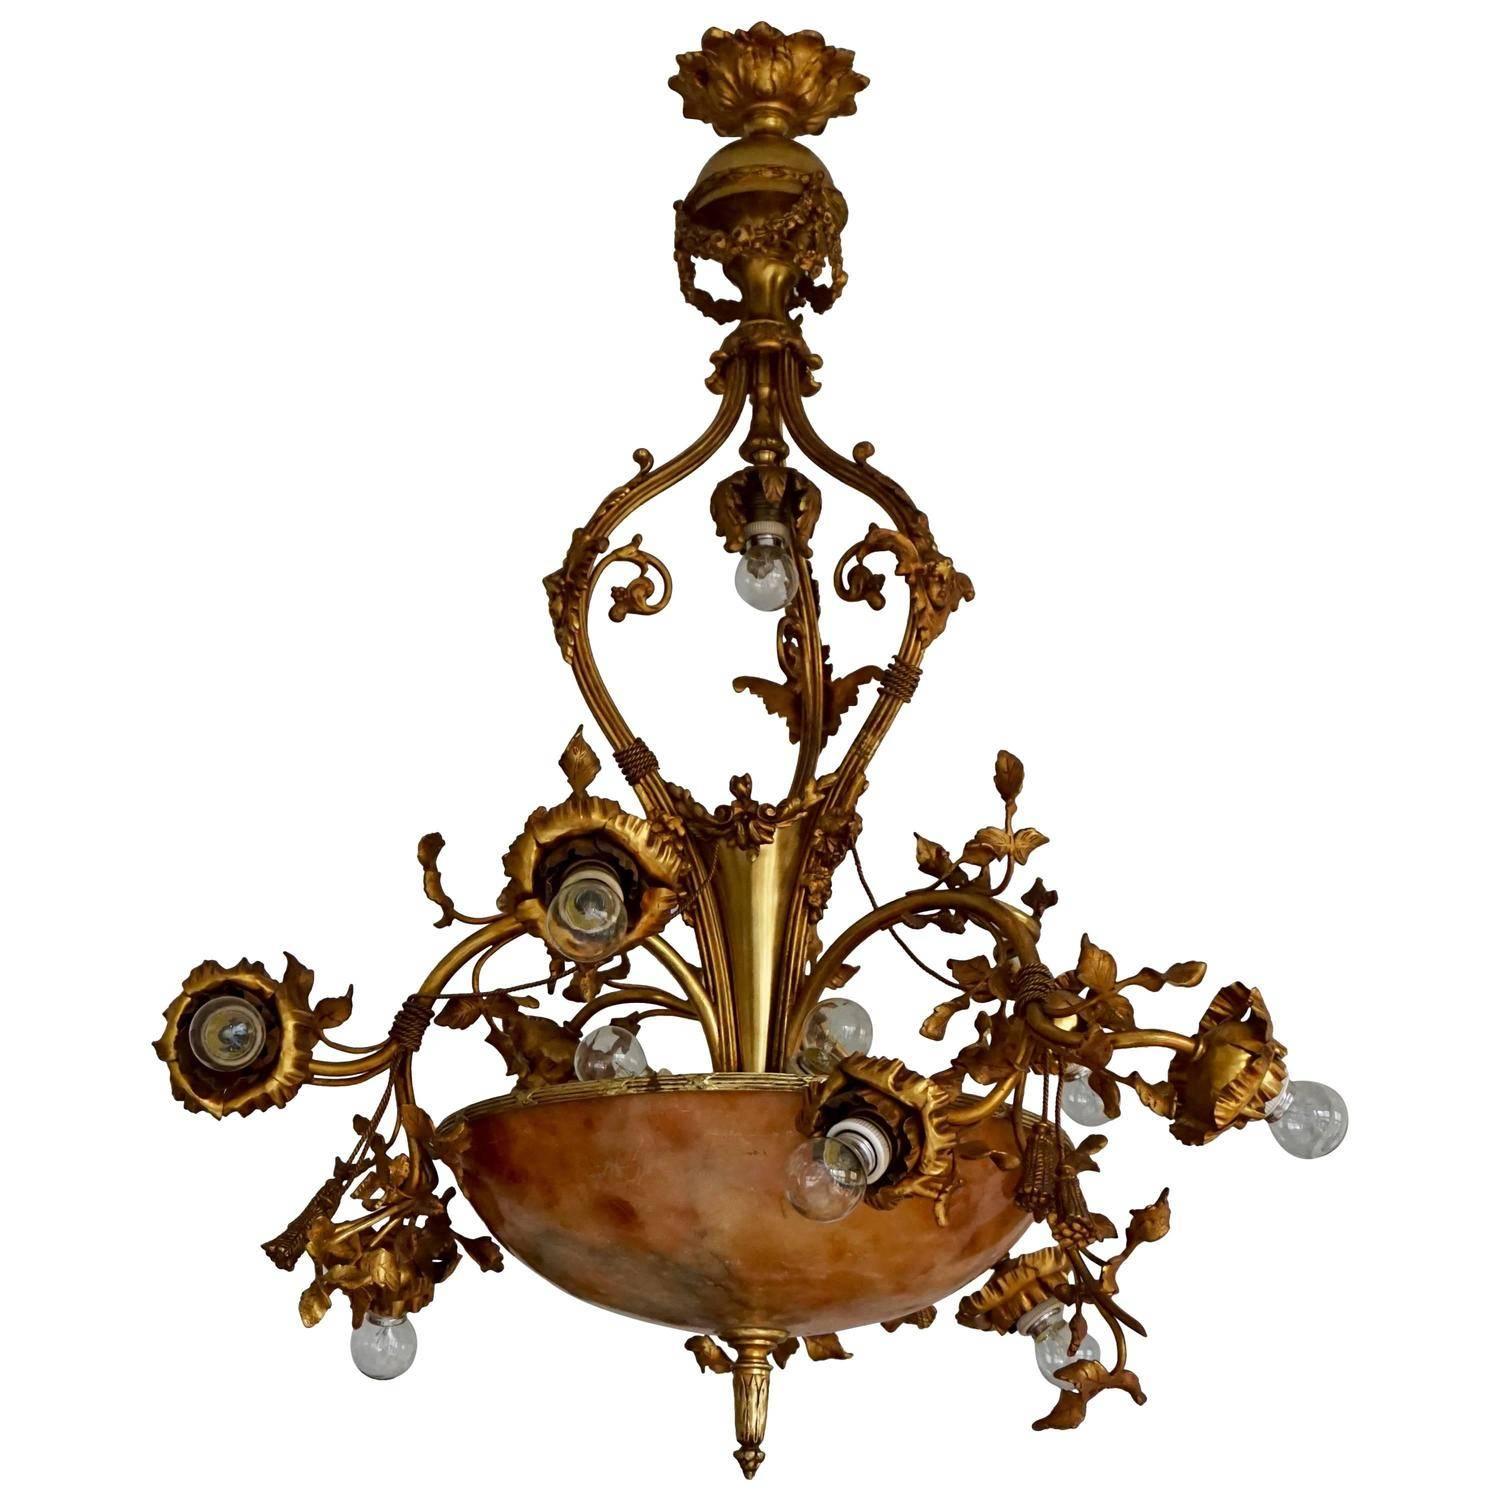 A fine bronze and alabaster Belle Époque chandelier, shaped as swirling and flowering rose branches, early 20th century. 
Dimensions: Diameter 75 cm, height 100 cm.